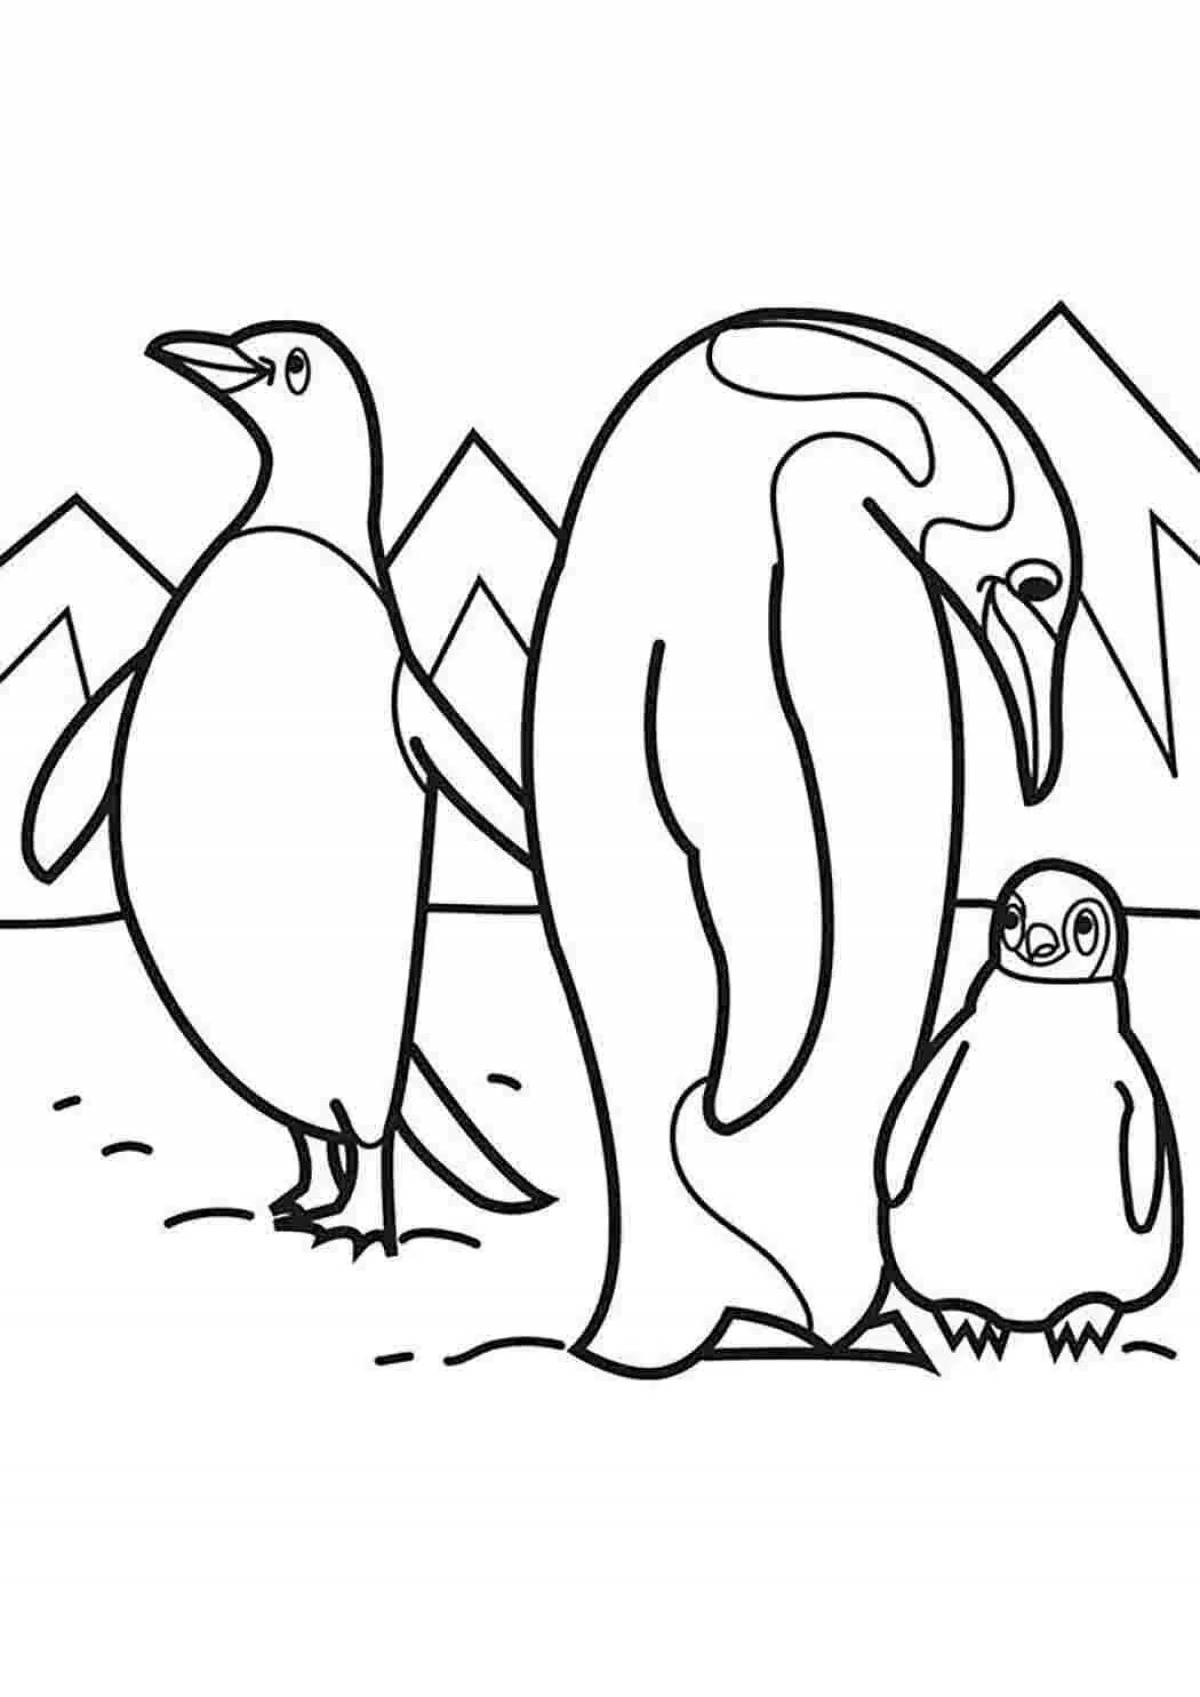 Antarctic coloring book for children 6-7 years old